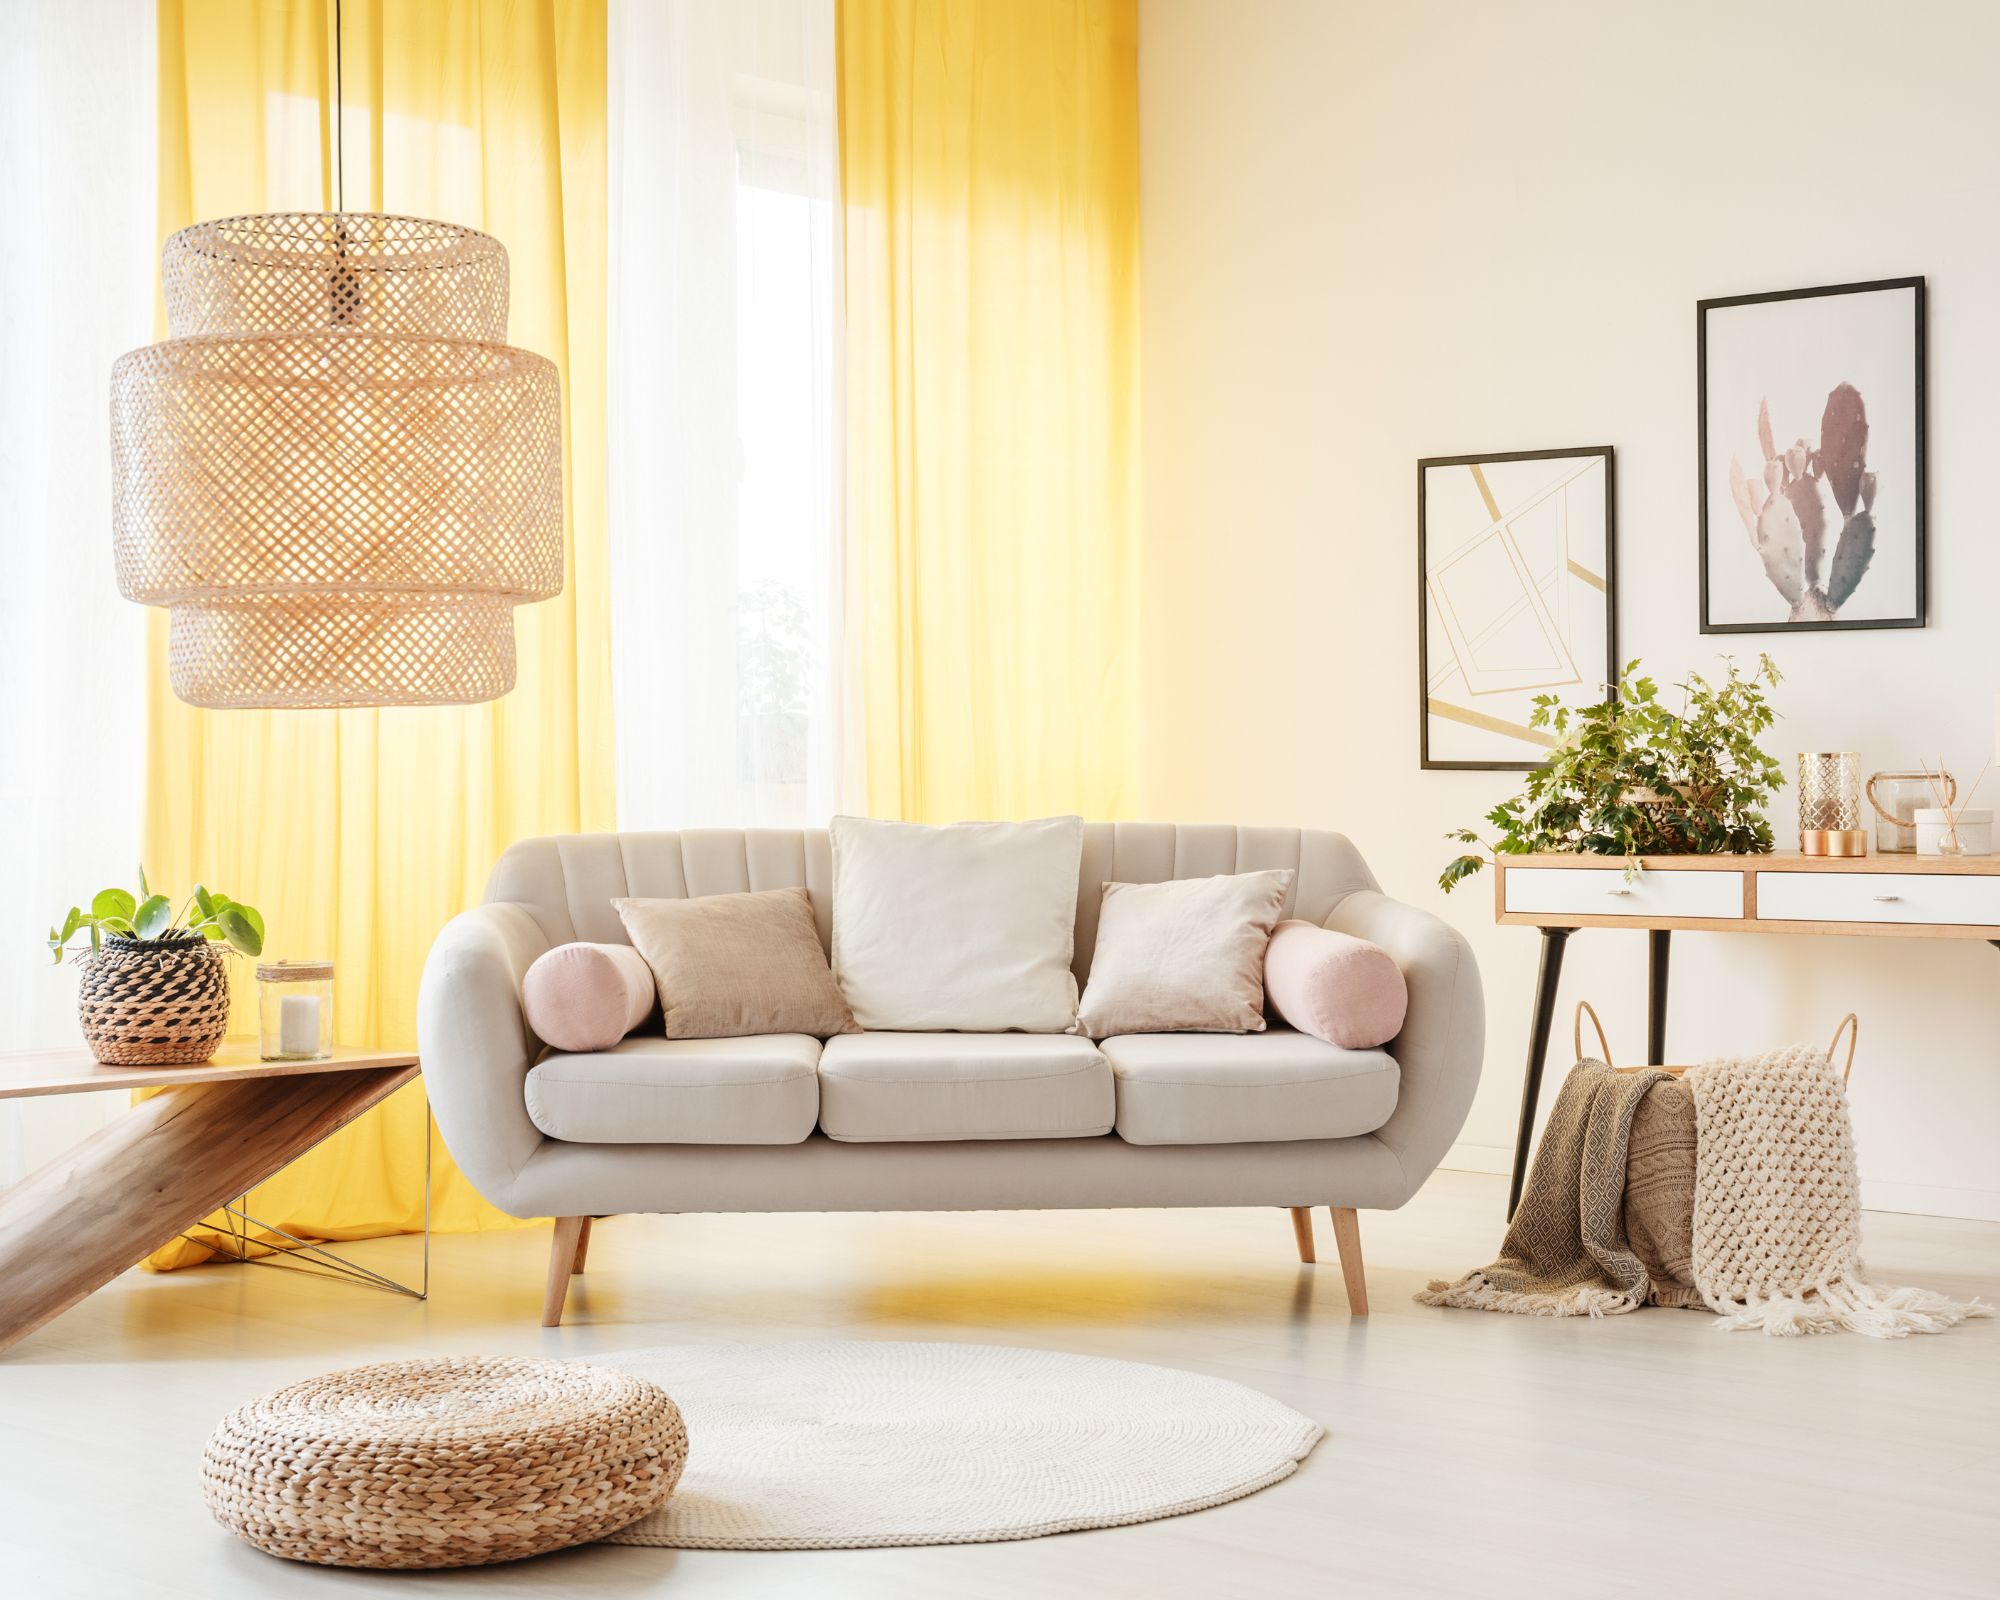 image of living space with a woven rug, rattan lamp, and nature-inspired décor